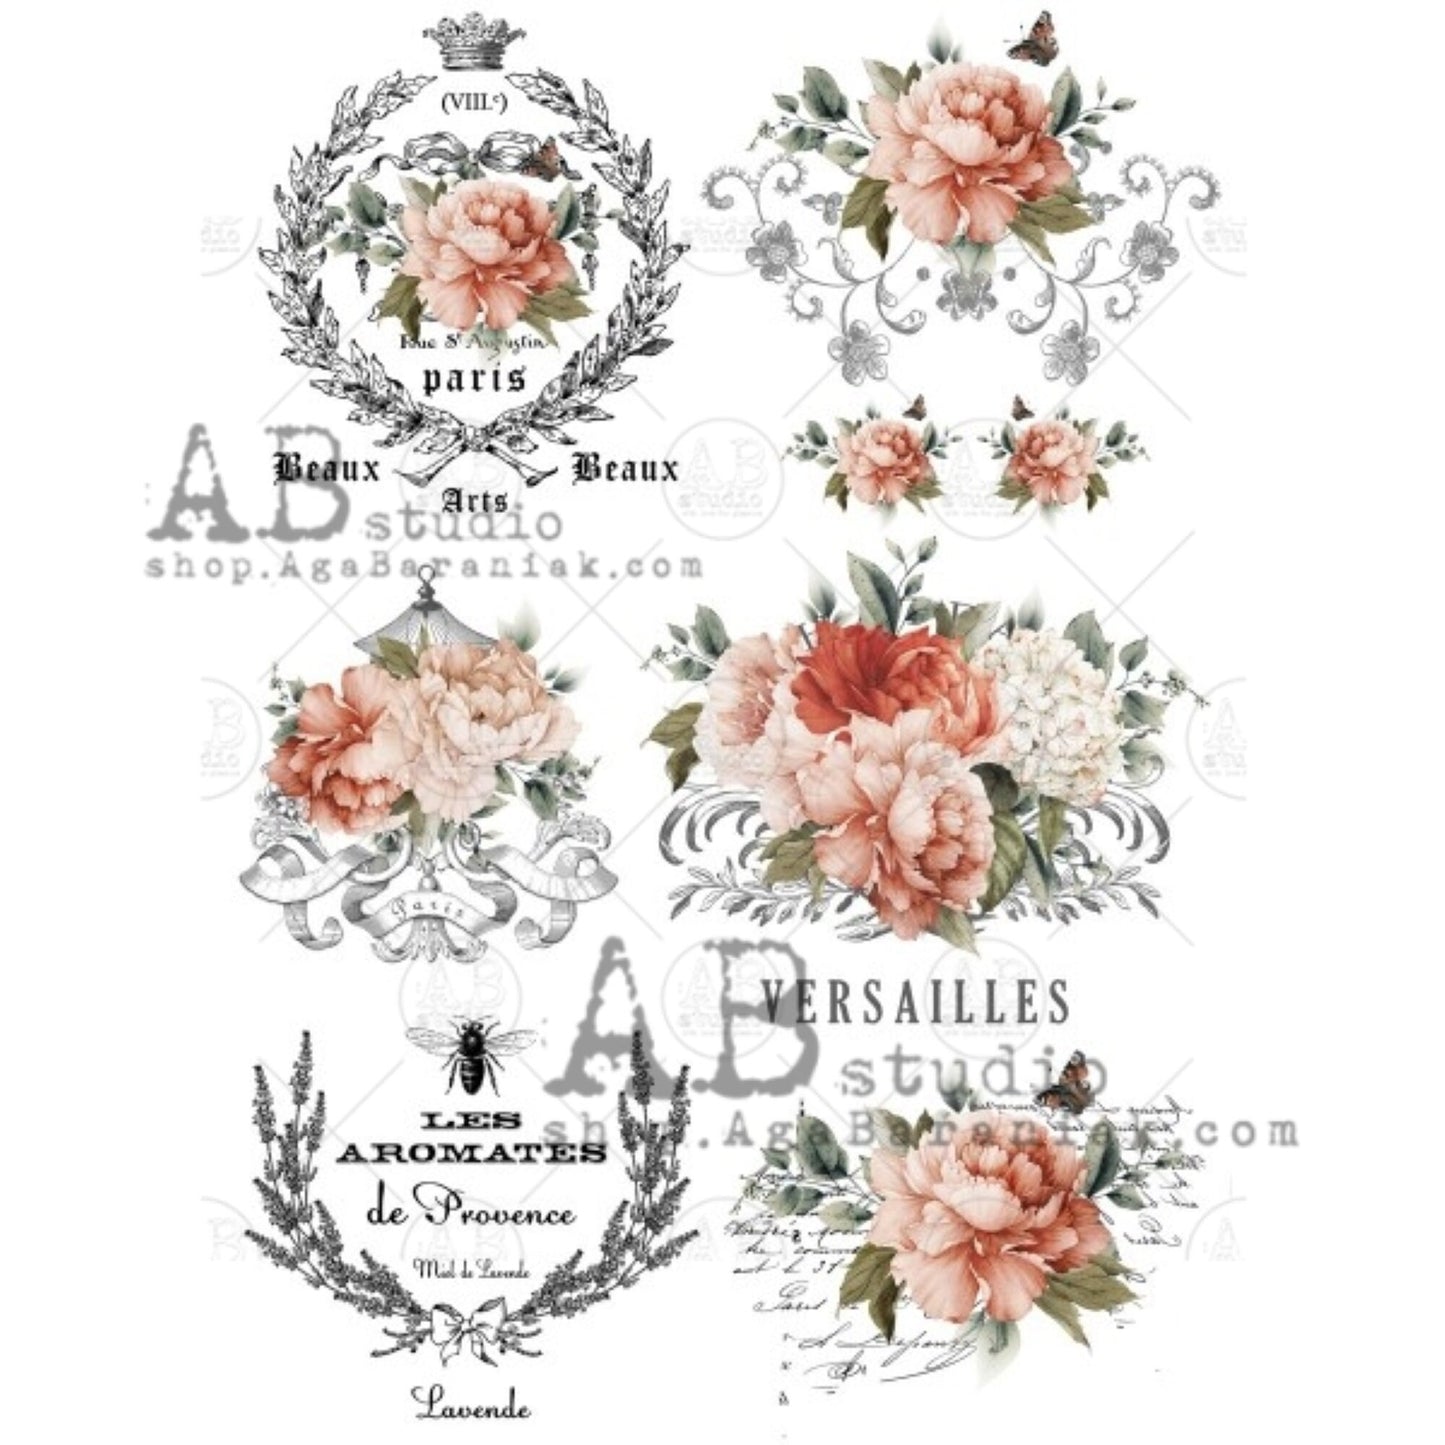 AB Studio, Peach, Shabby Chic, roses, Floral, bouquets, 0676 Size: A4 - 8.27 X 11.69 inches Rice Paper for Decoupage Imported from Poland